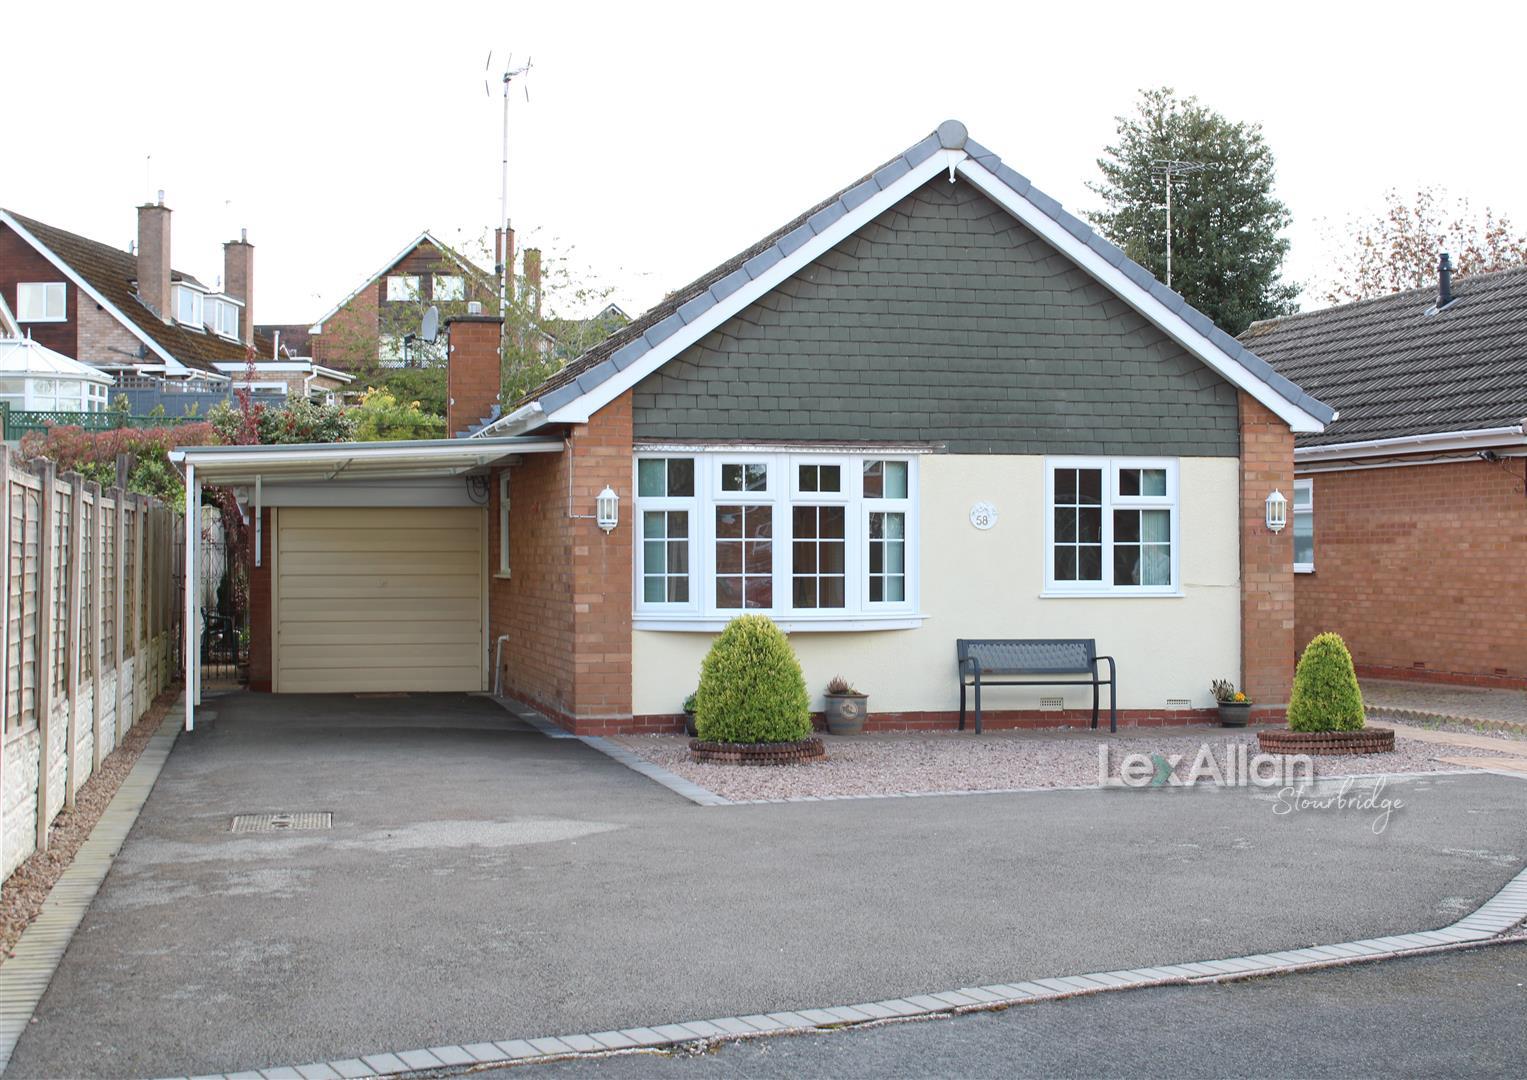 2 bed detached bungalow for sale - Property Image 1